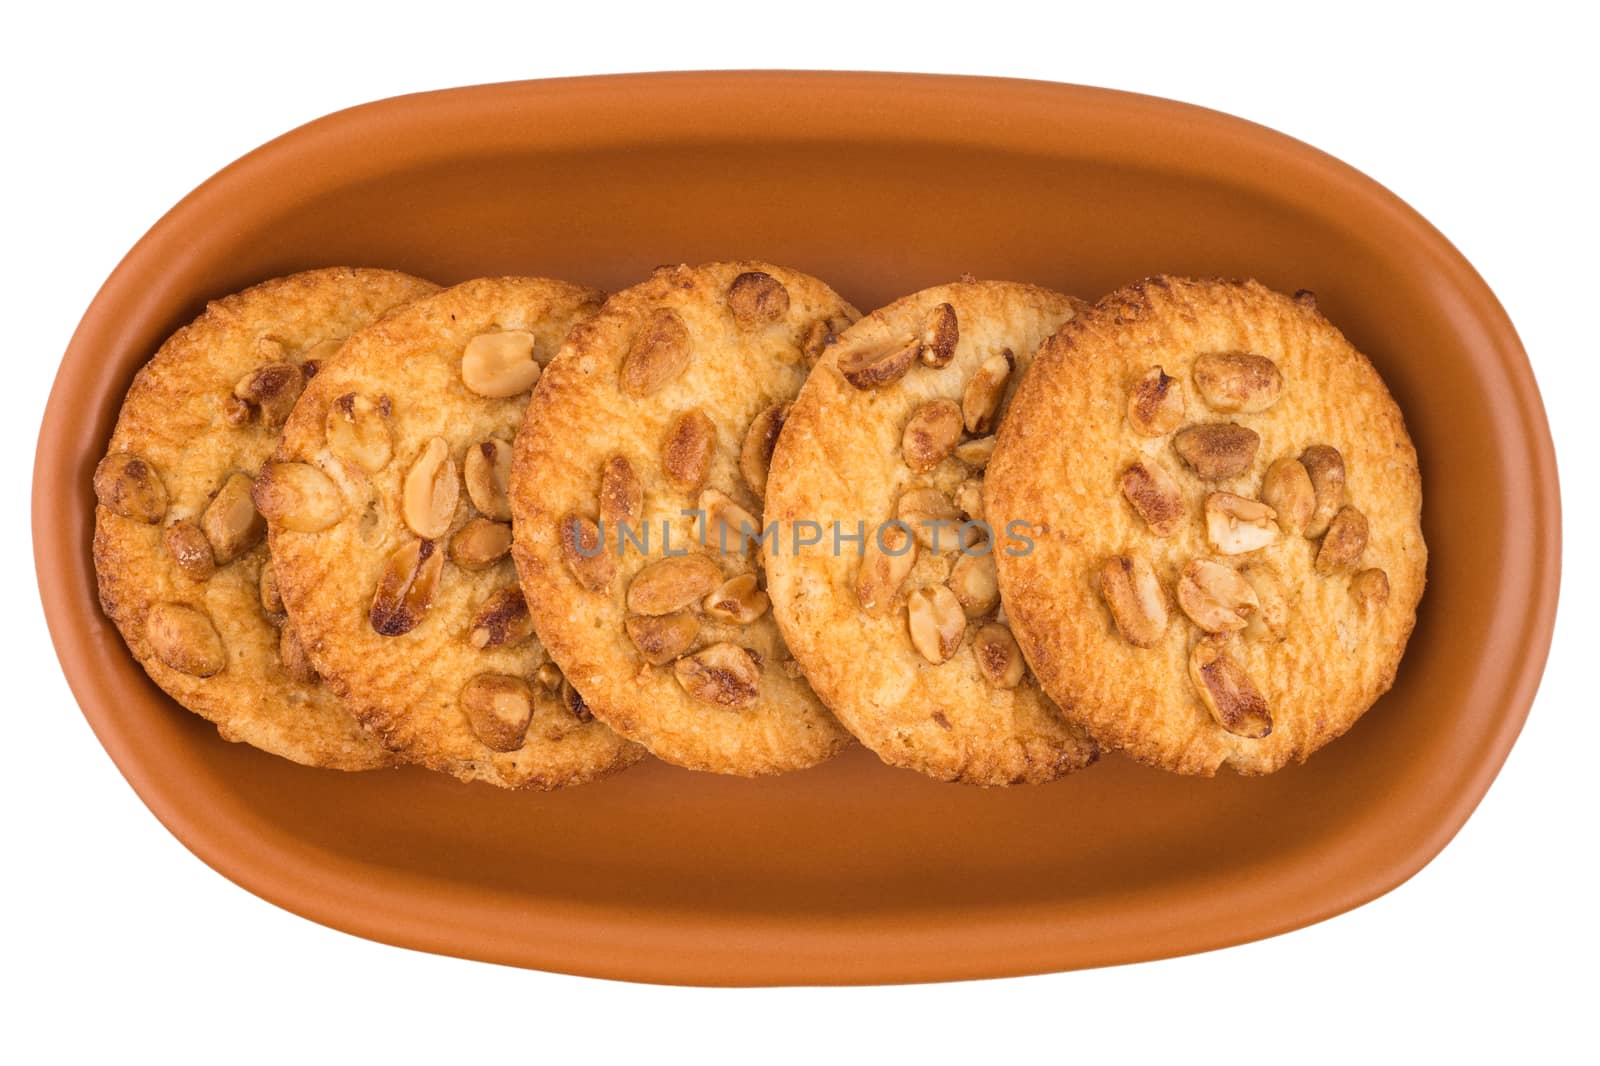 Peanut cookies in a brown plate. Isolated on white background.  by DGolbay